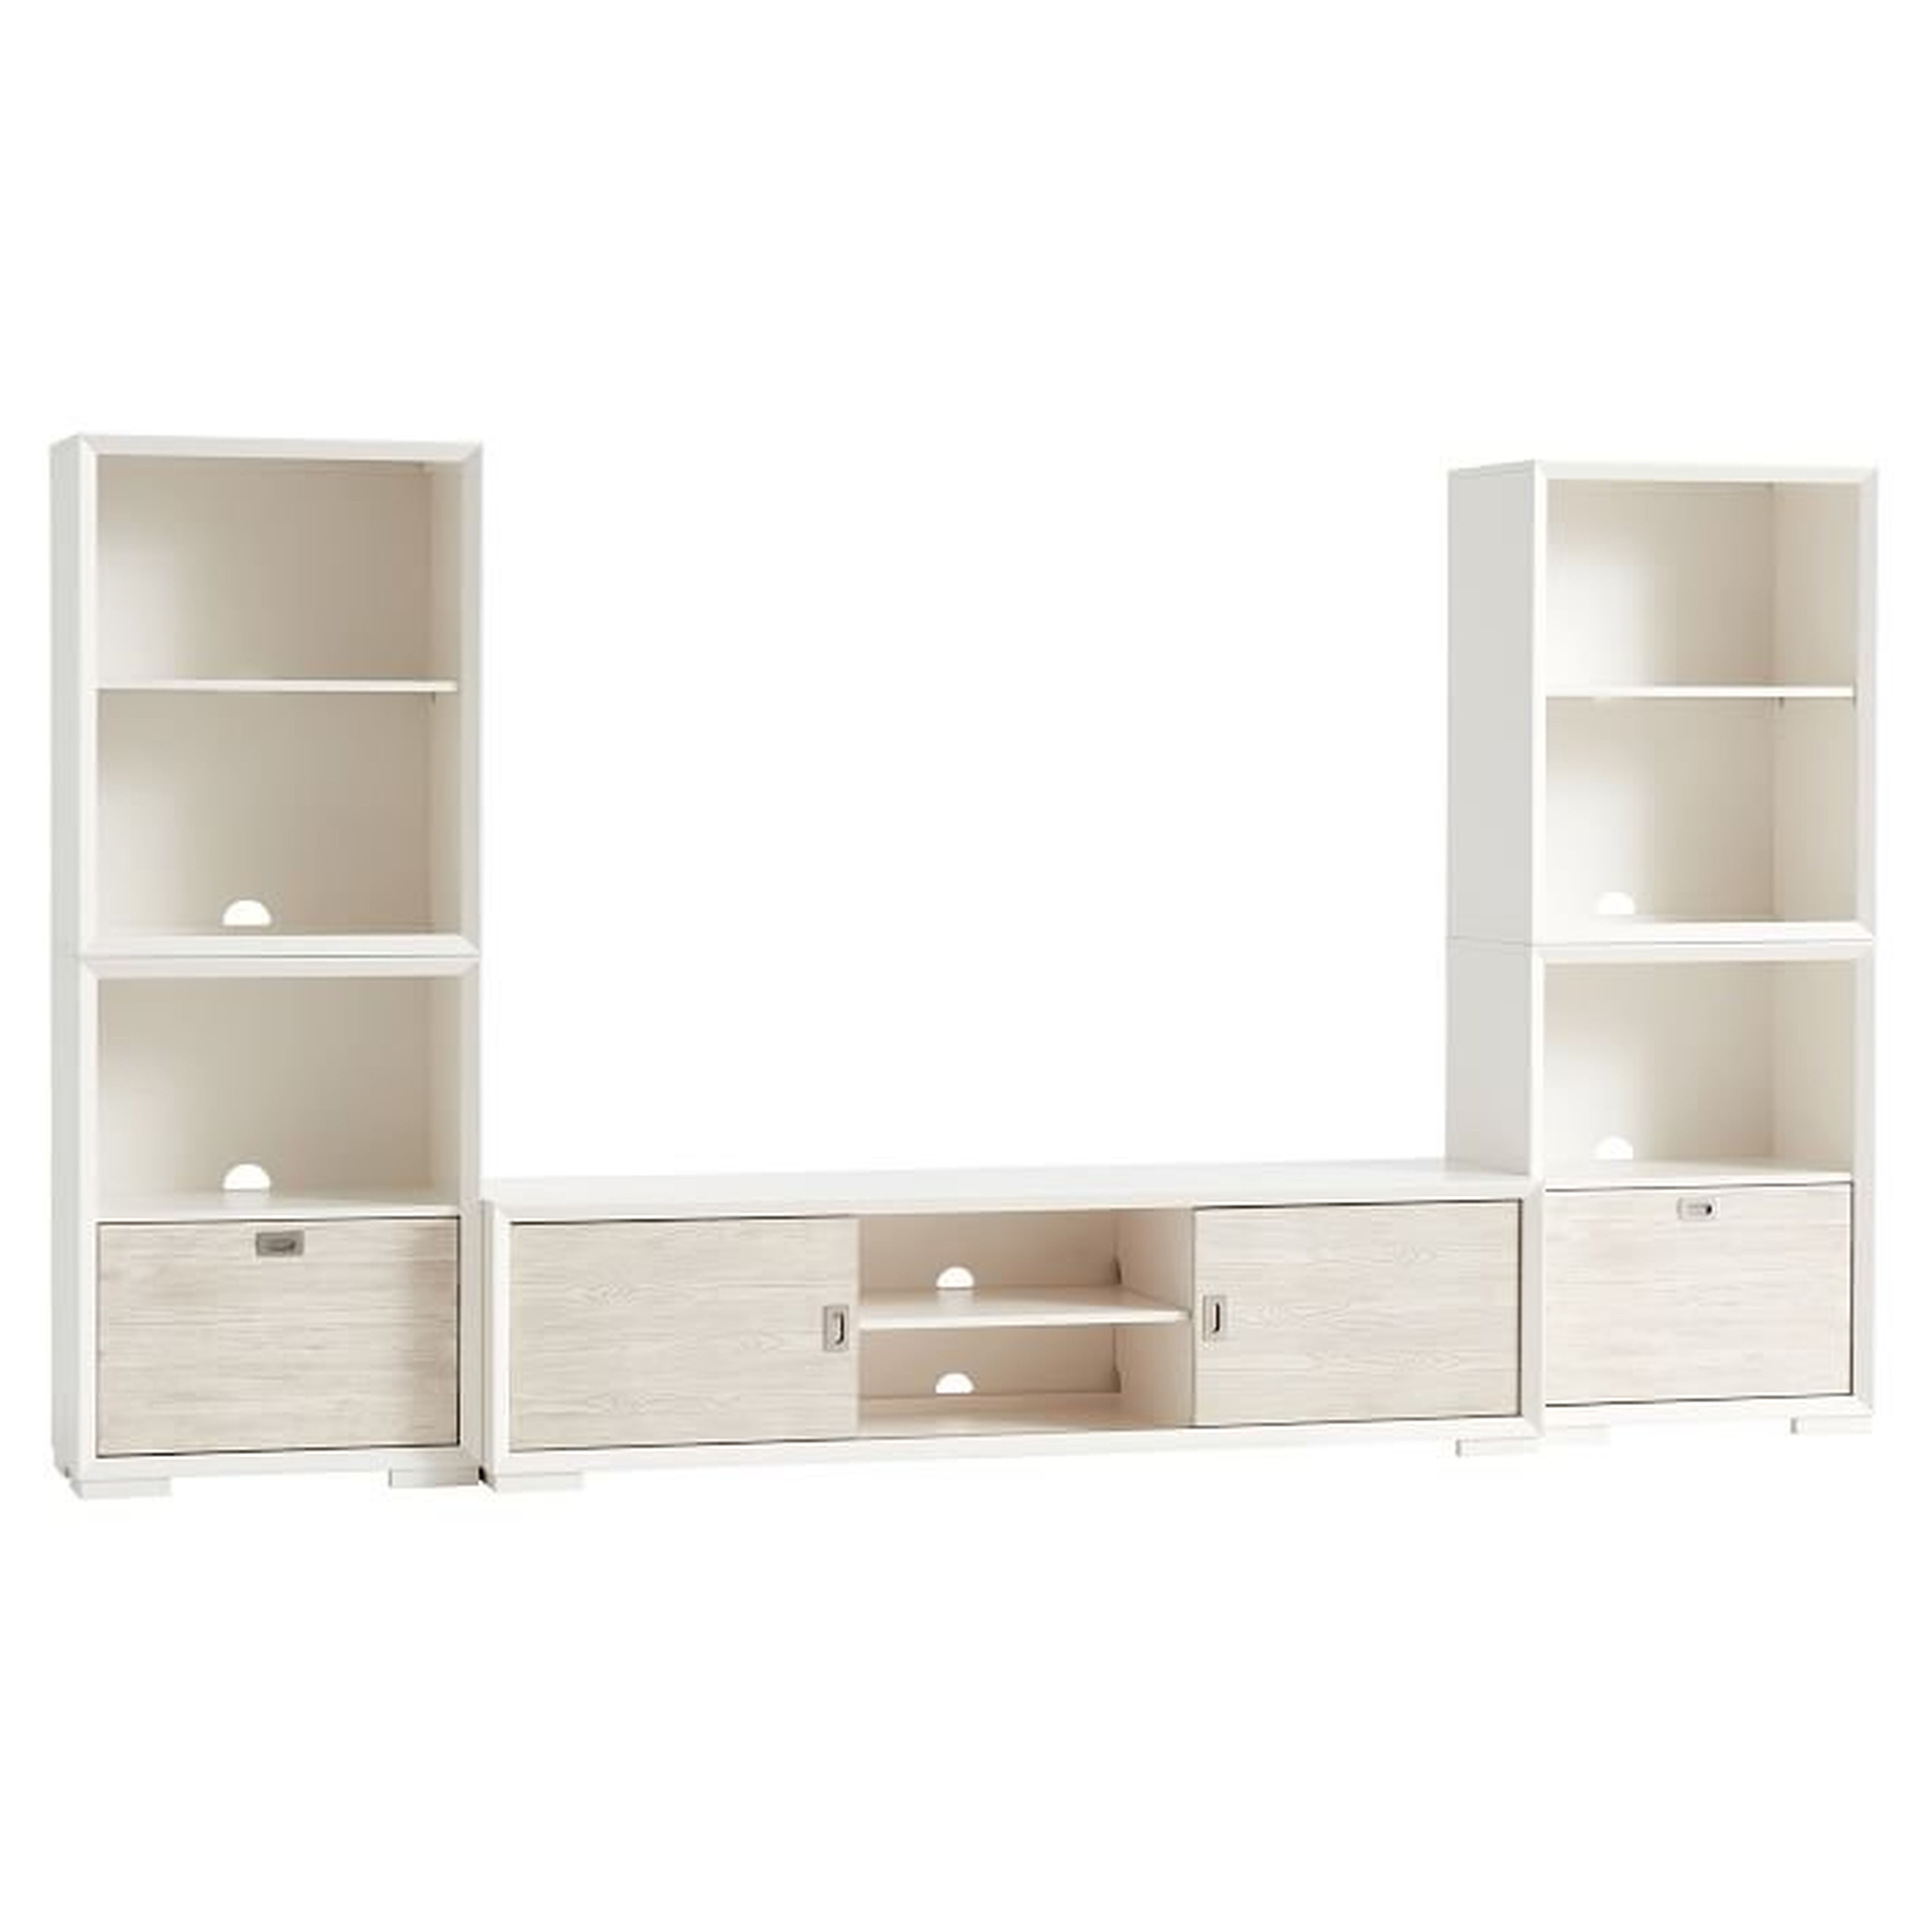 Callum Super Media Set, 2 One-Drawer + 2 Cubby + Media Unit, Weathered White/ WB Simply White - Pottery Barn Teen